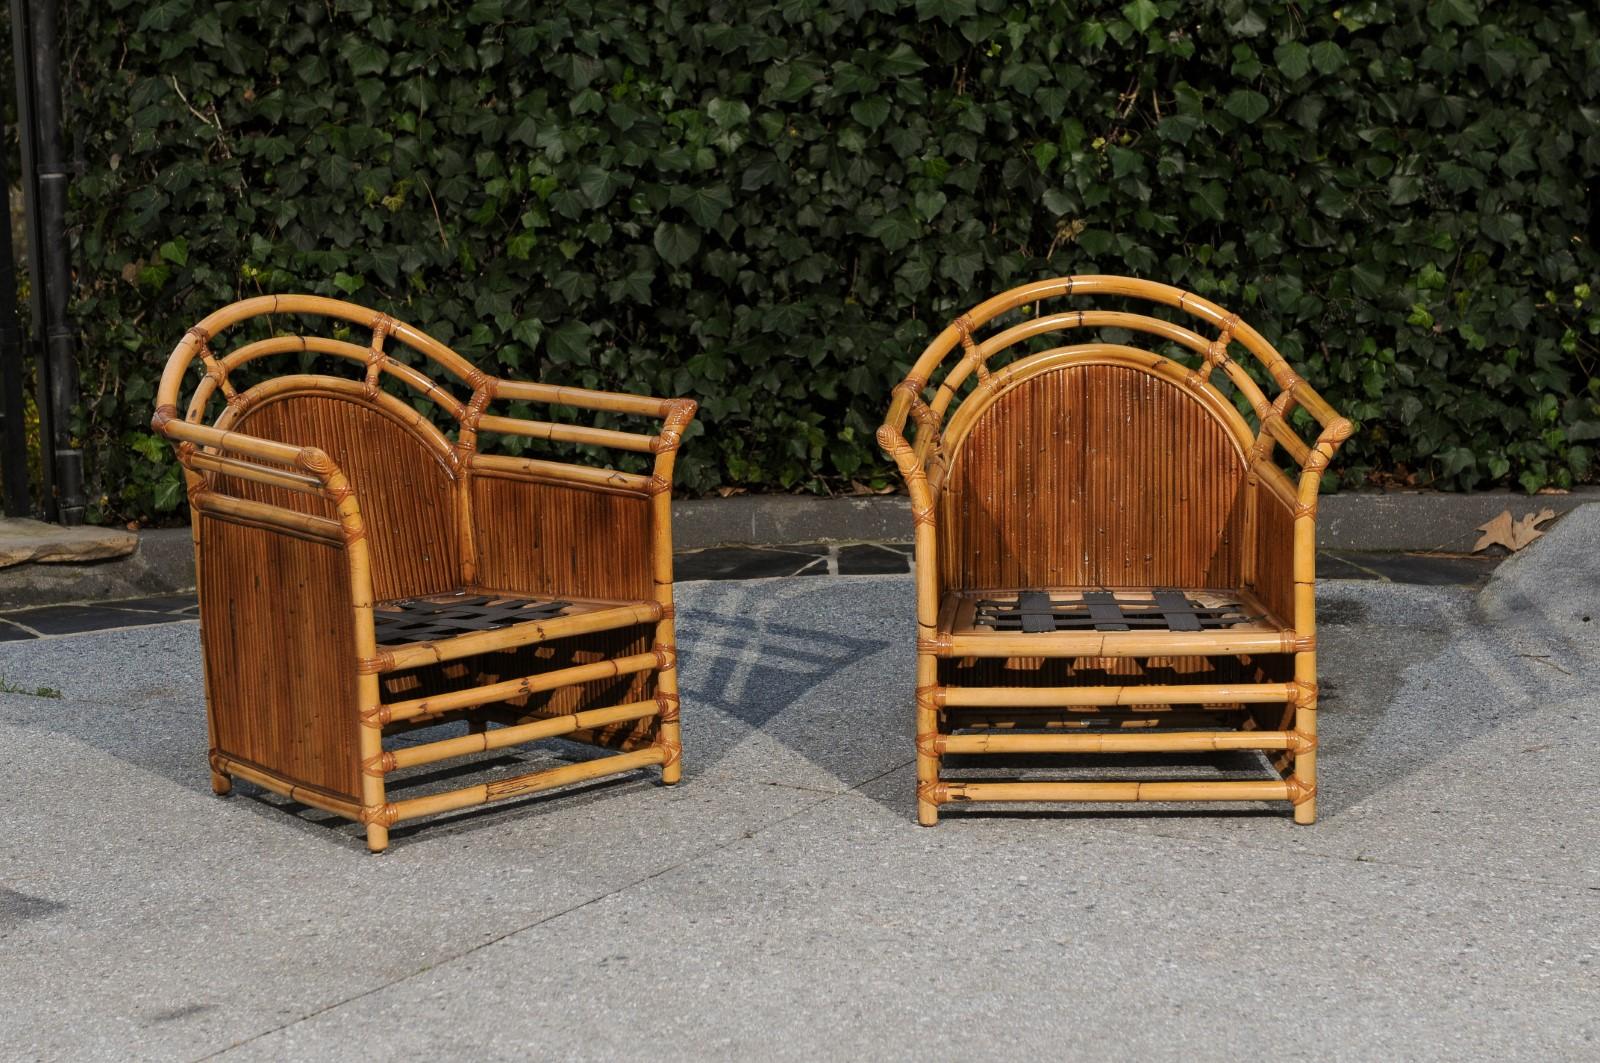 These magnificent lounge chair frames are shipped as professionally photographed and described in the listing narrative: Meticulously professionally restored and ready for upholstery.

An incredibly rare and beautiful pair of restored lounge or